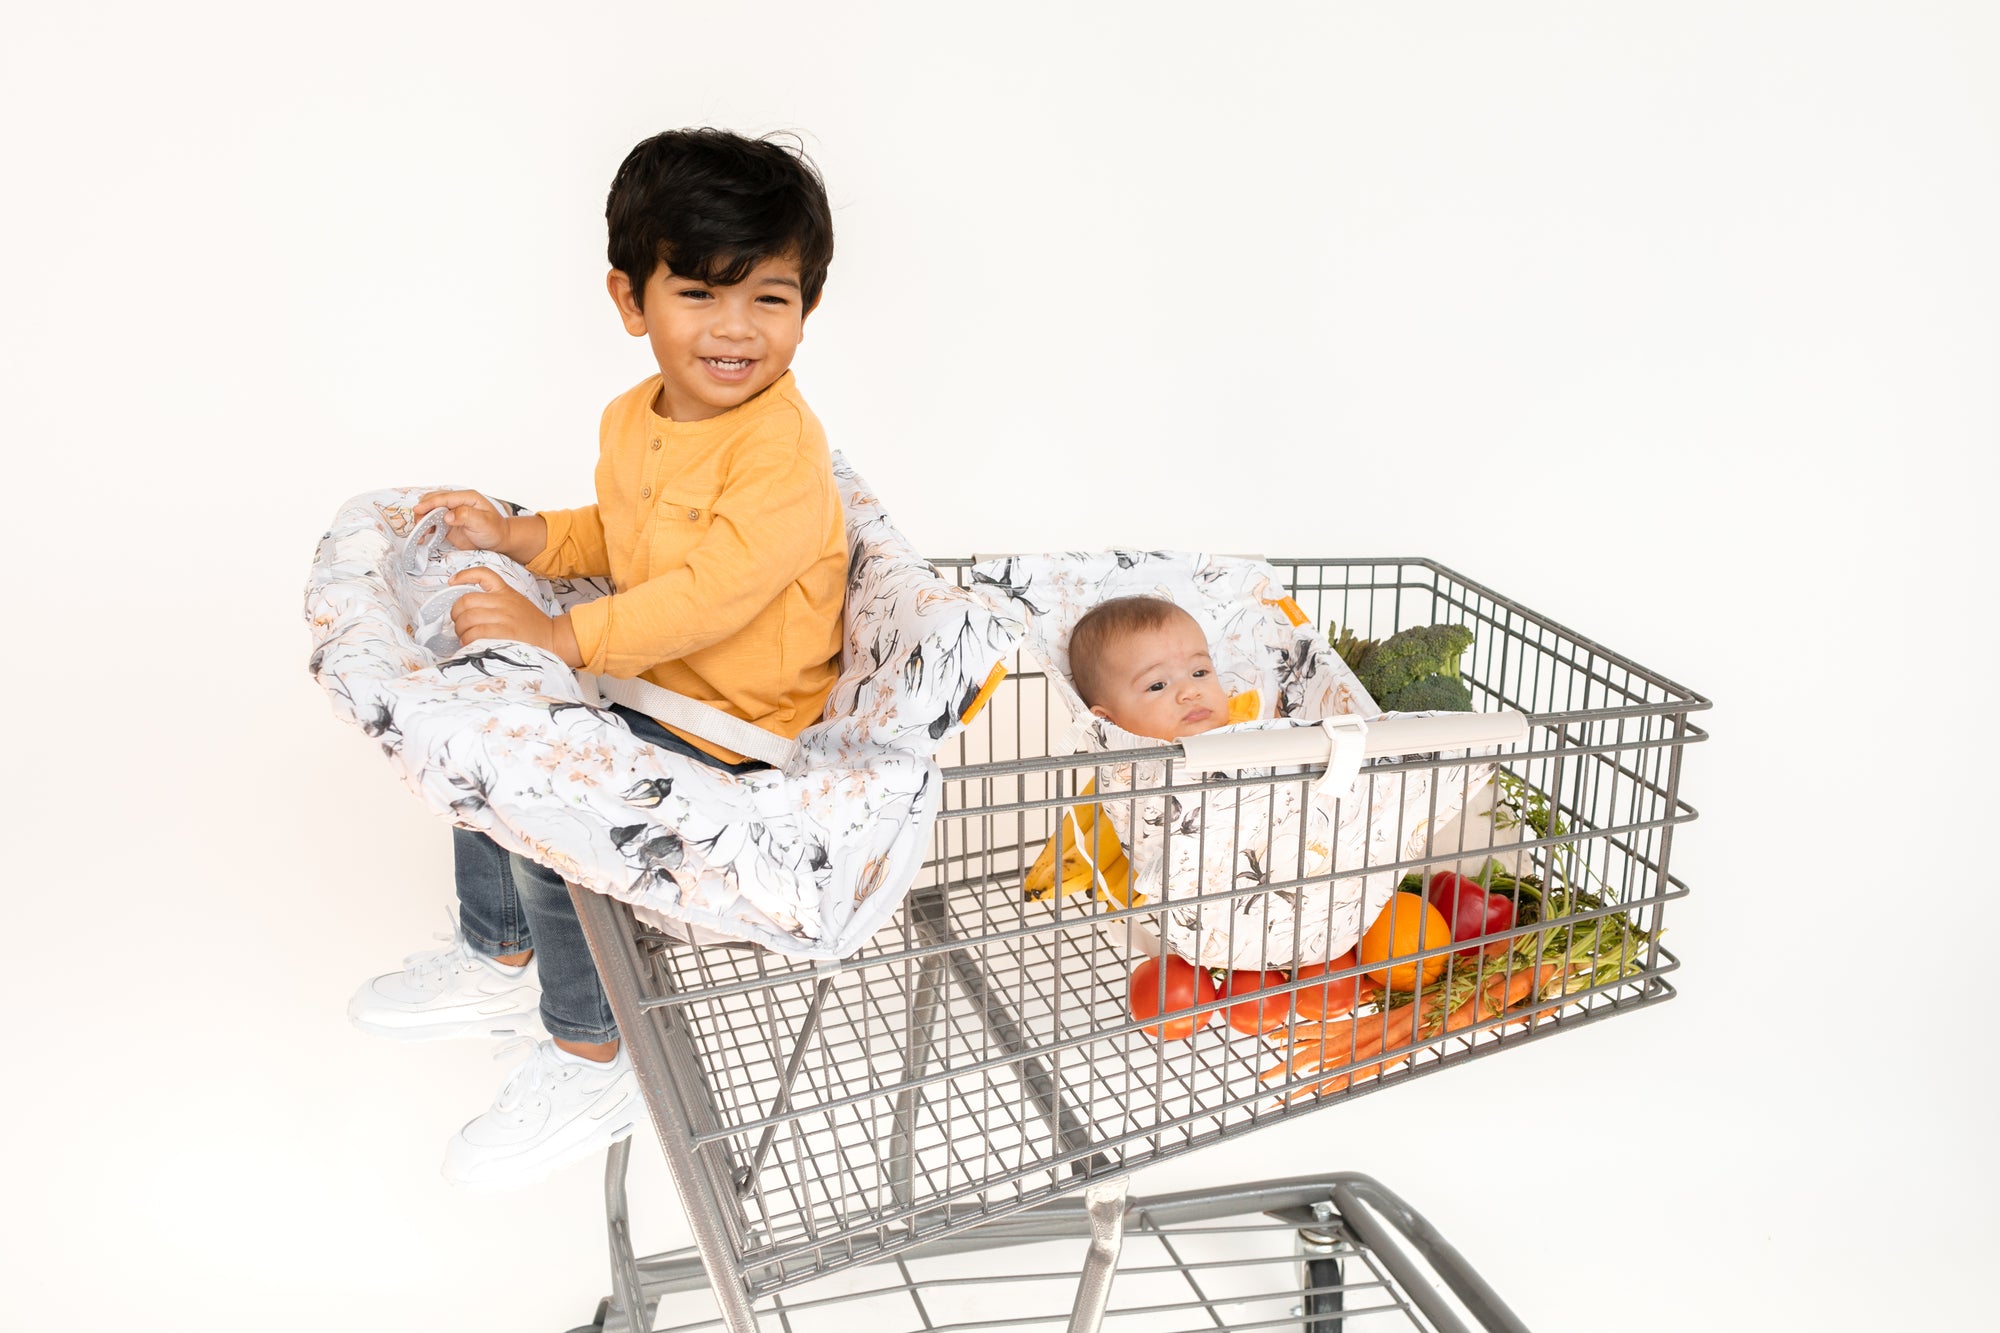 The Benefits of Using a Shopping Cart Cover